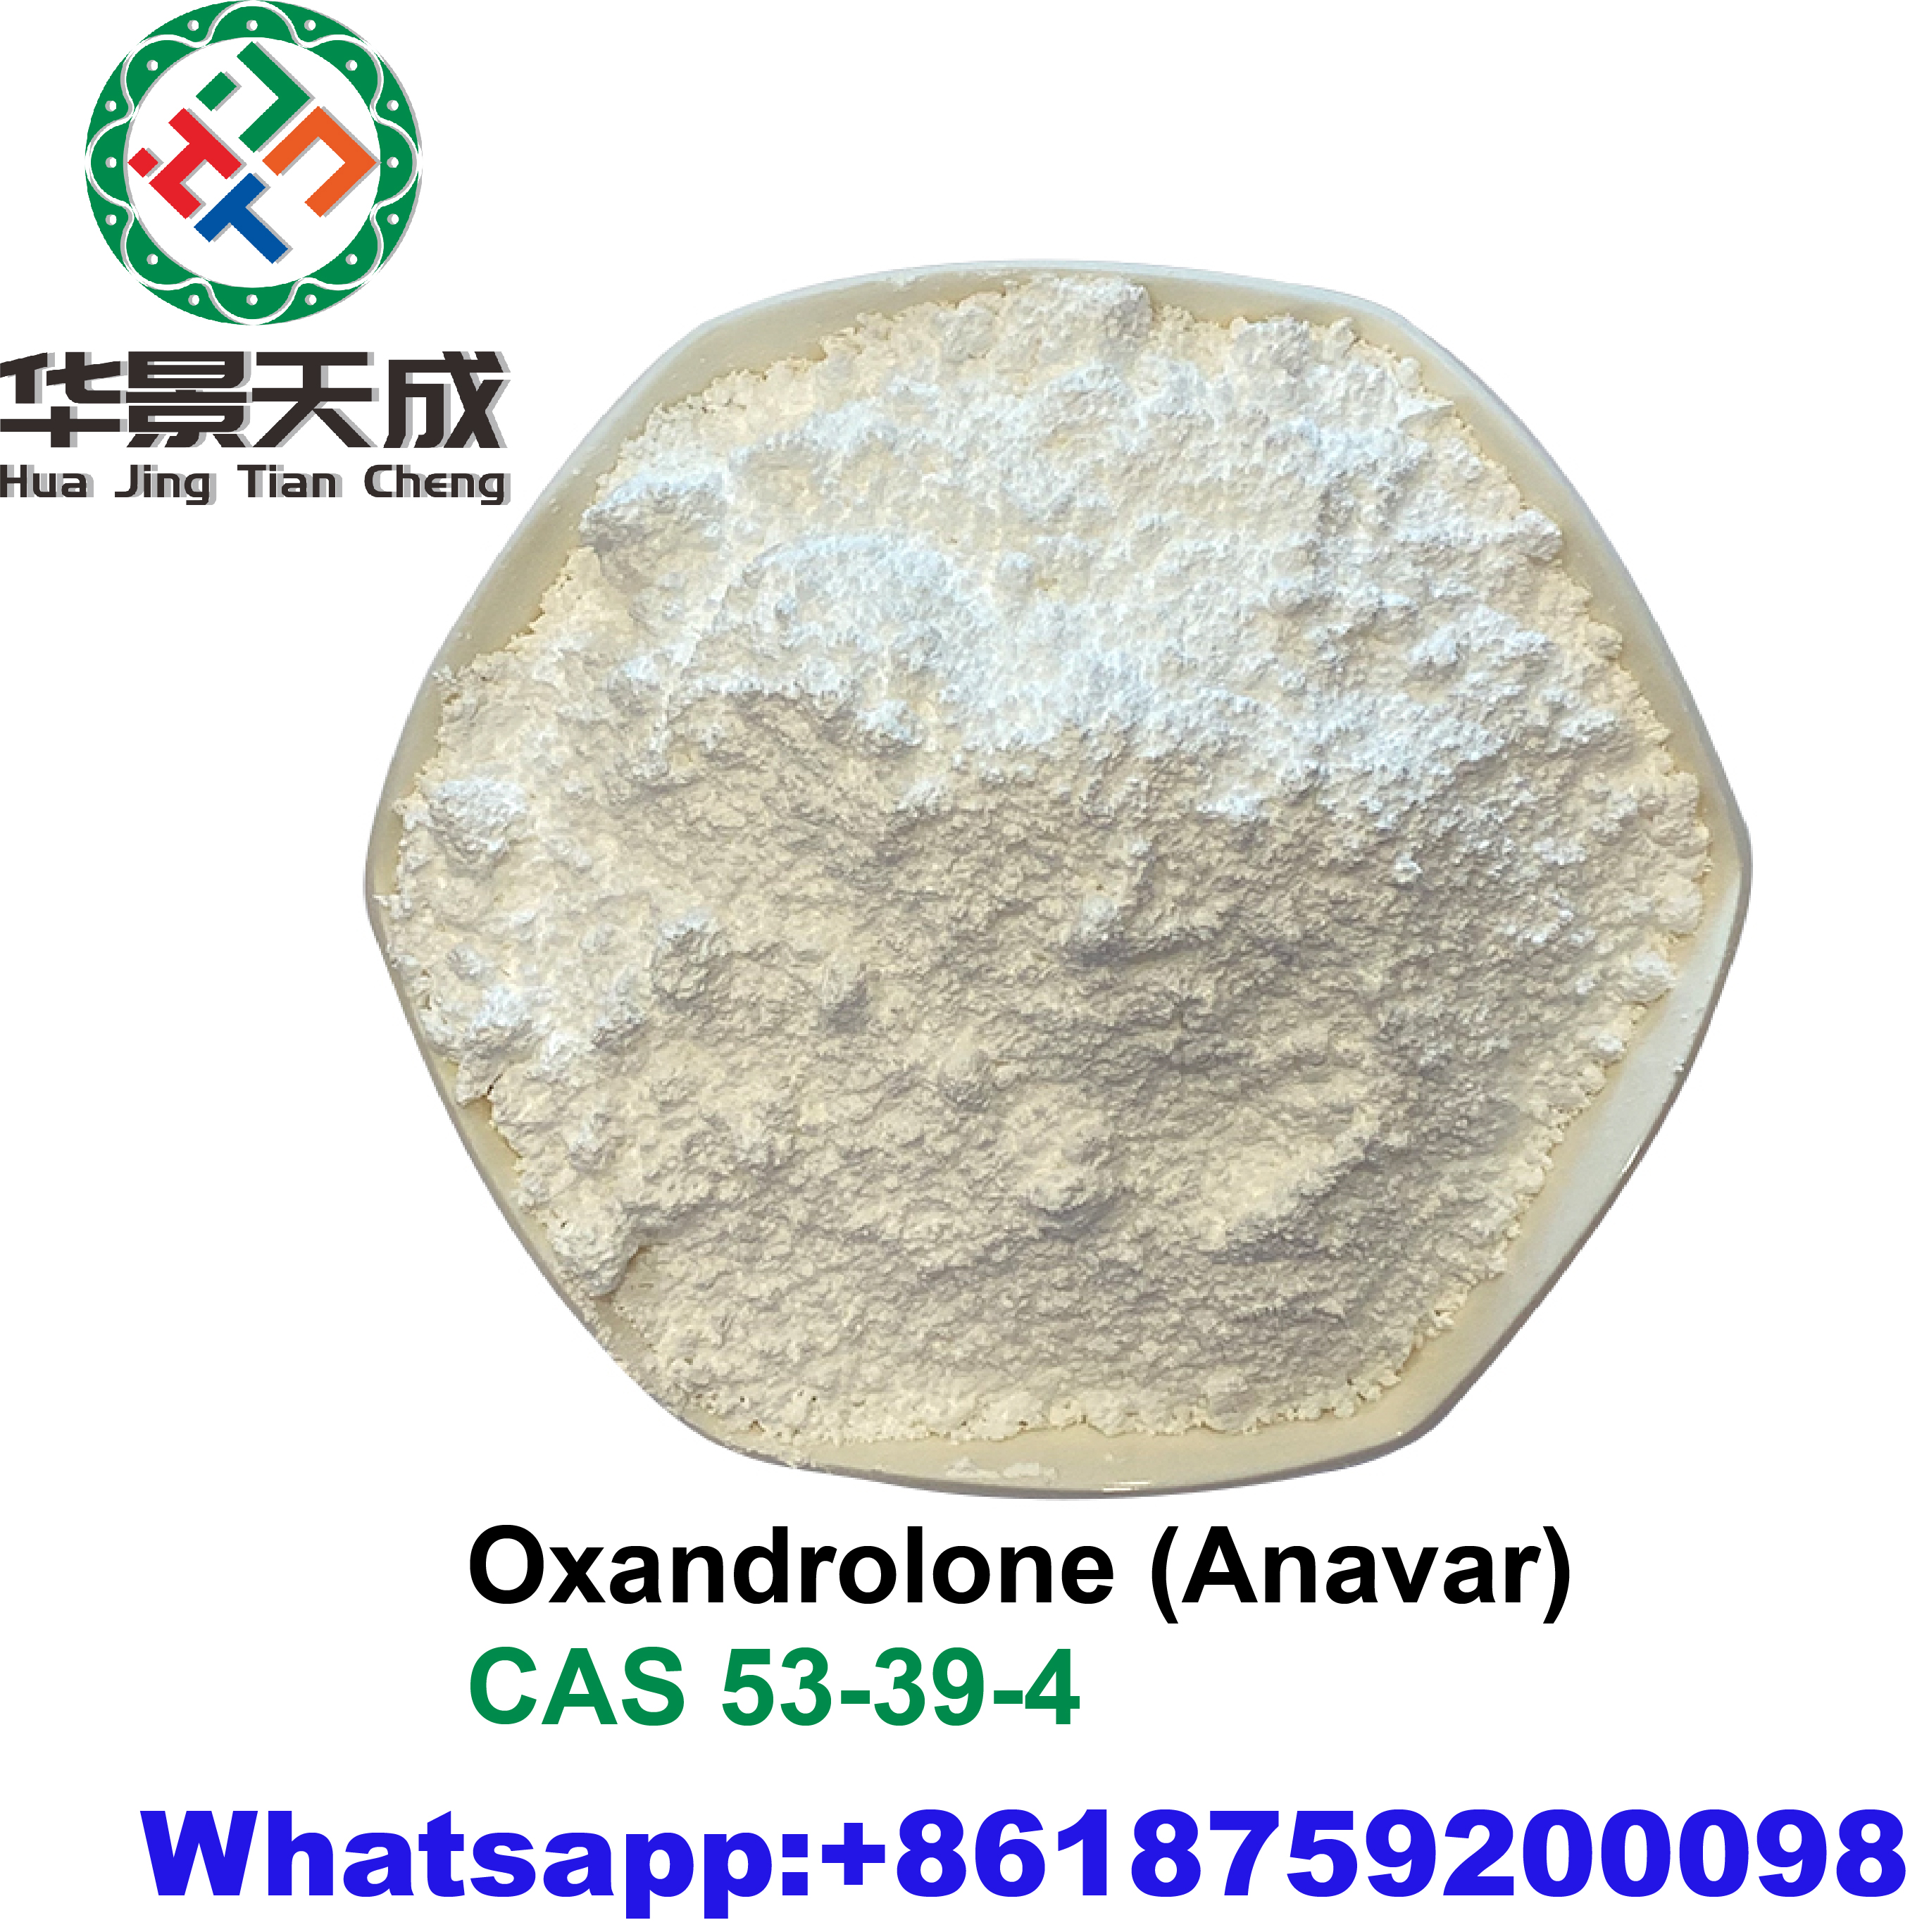 Oxandrolone / Anavar CAS: 53-39-4 Powder Anavar For Muscle Growth Featured Image